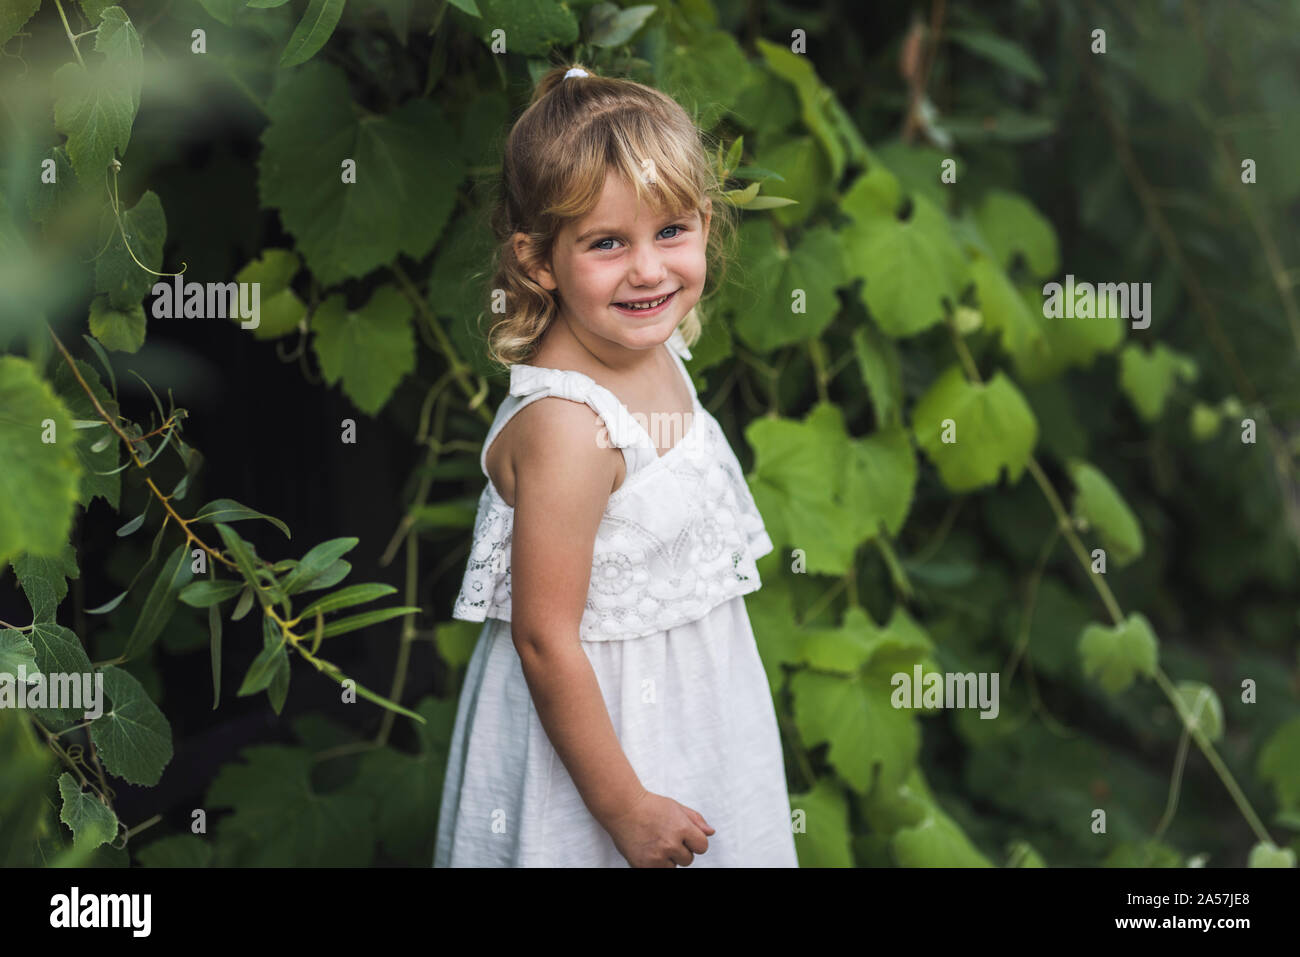 Sweet smiling young girl in white sundress outdoors near lush plants Stock Photo